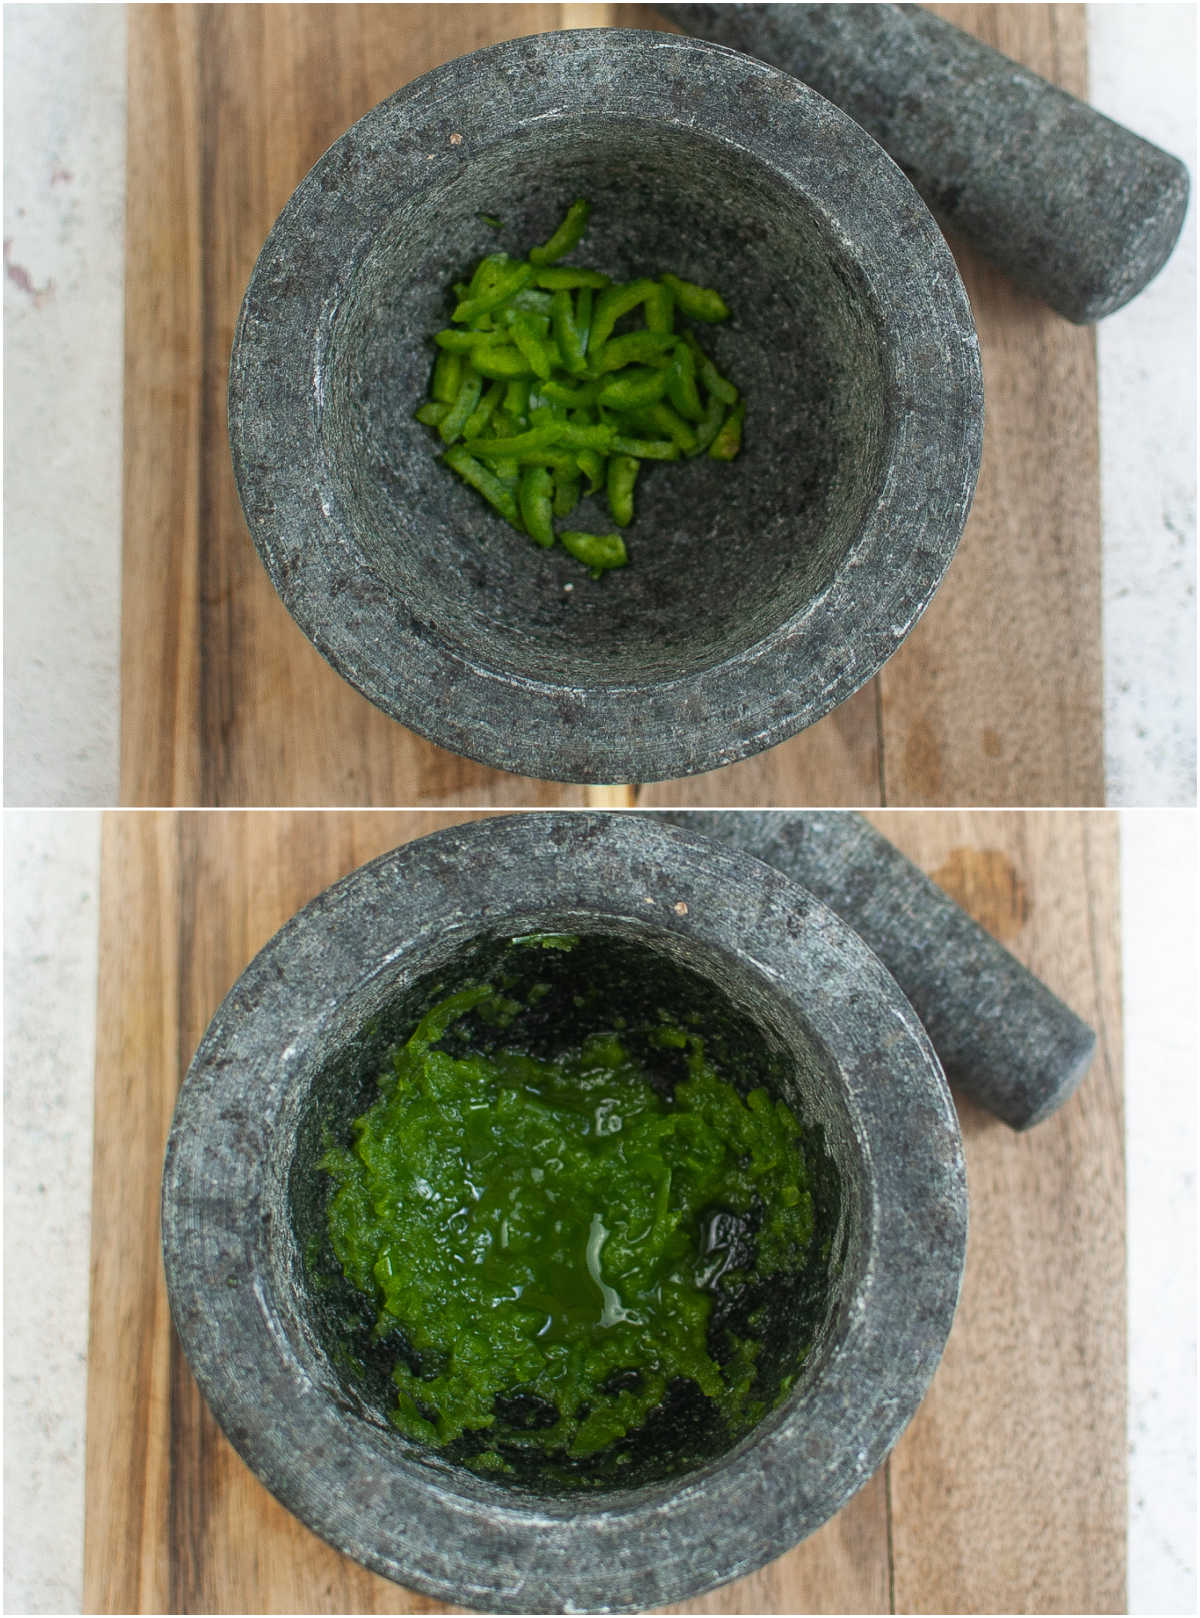 Chopped and pestled Jalapenos in a mortar